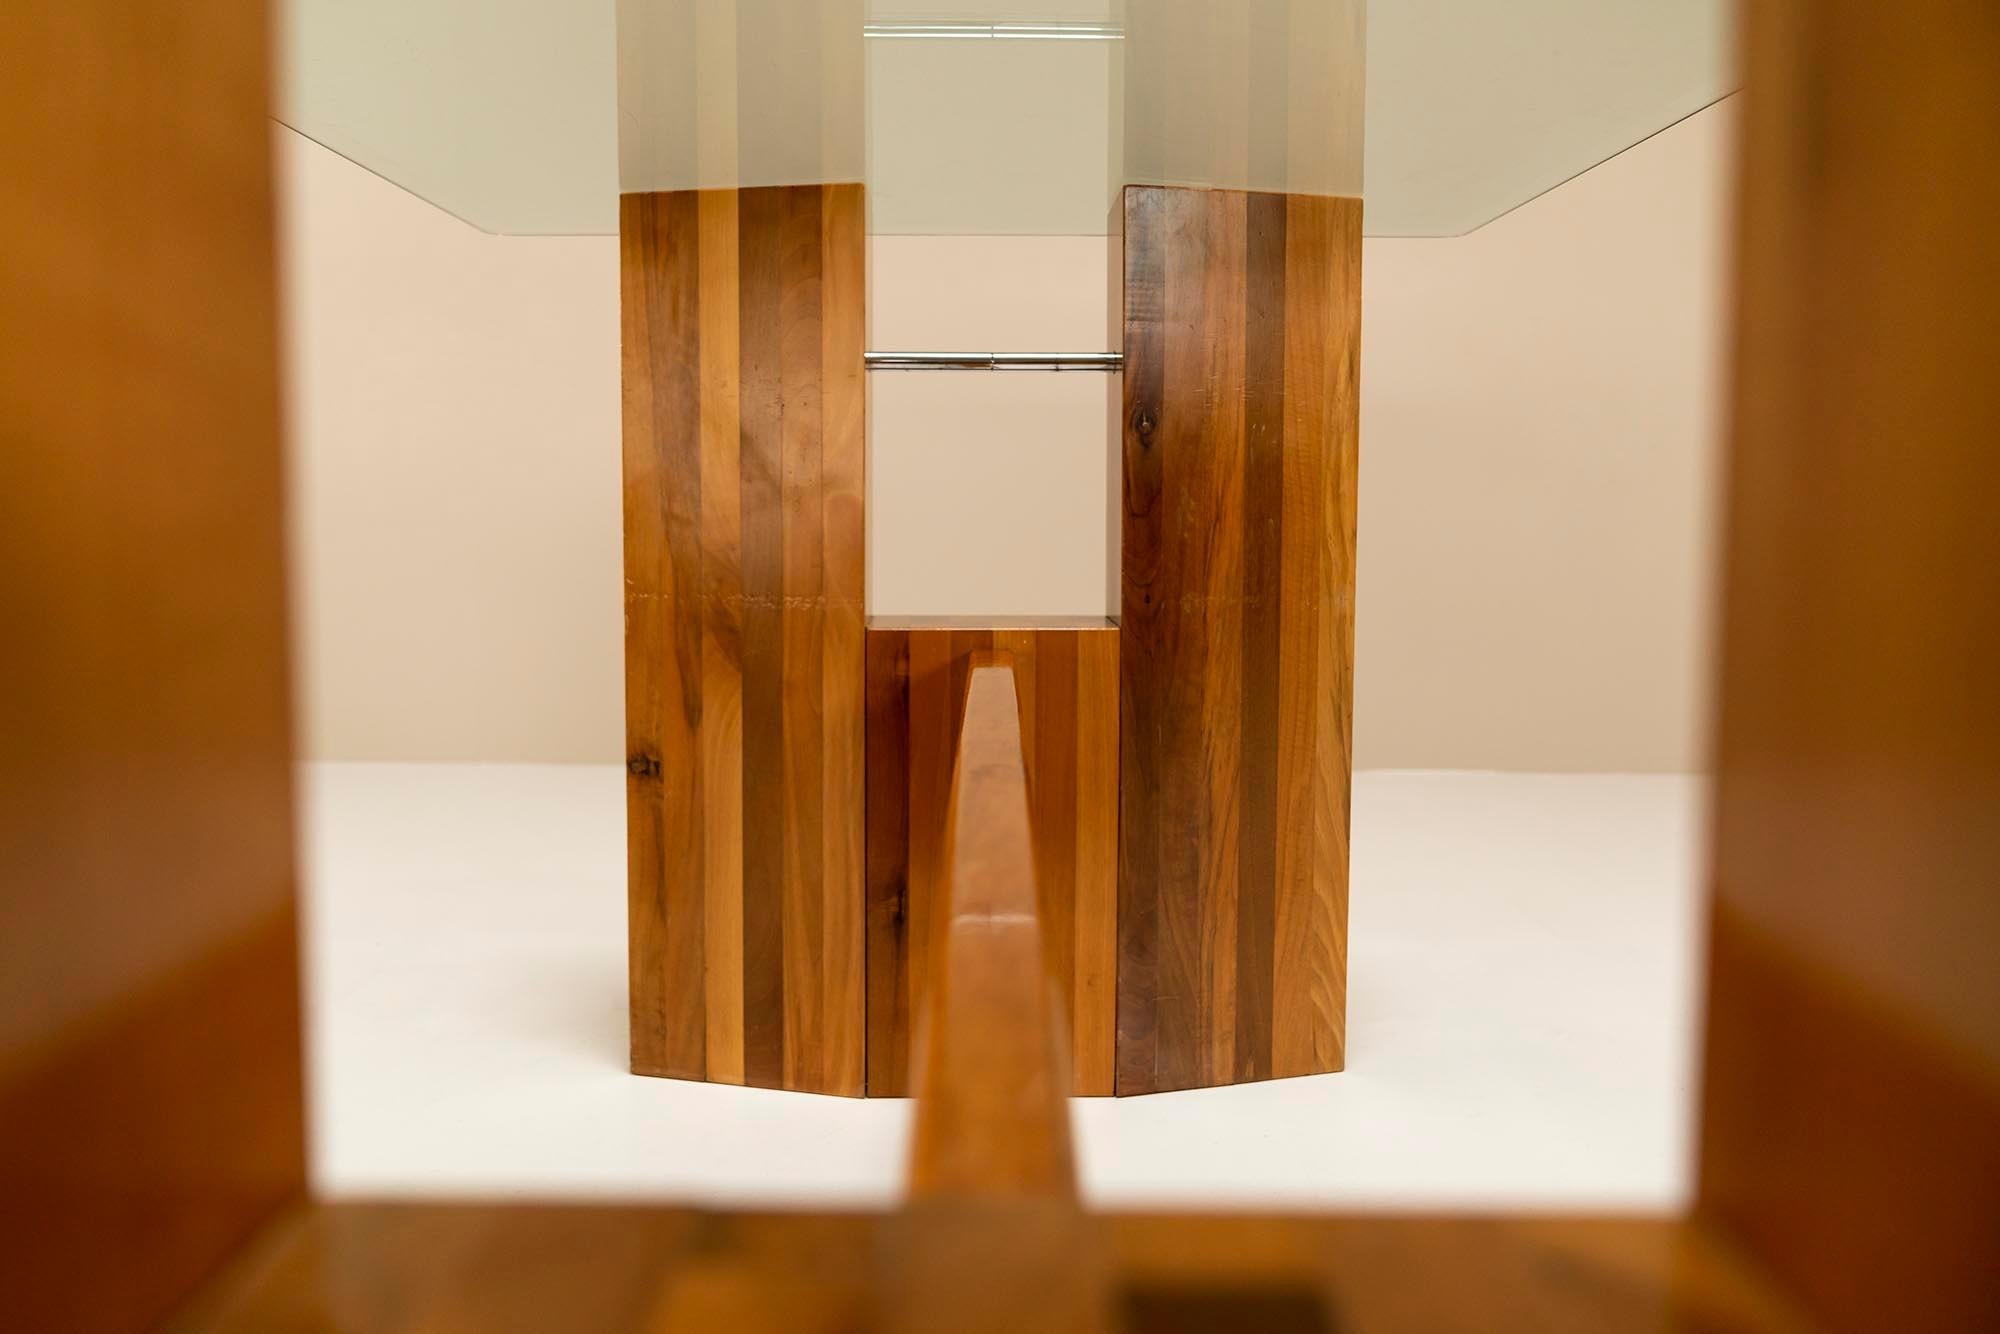 Architectural Table or Desk in Walnut and Glass, Italy 1970s For Sale 2